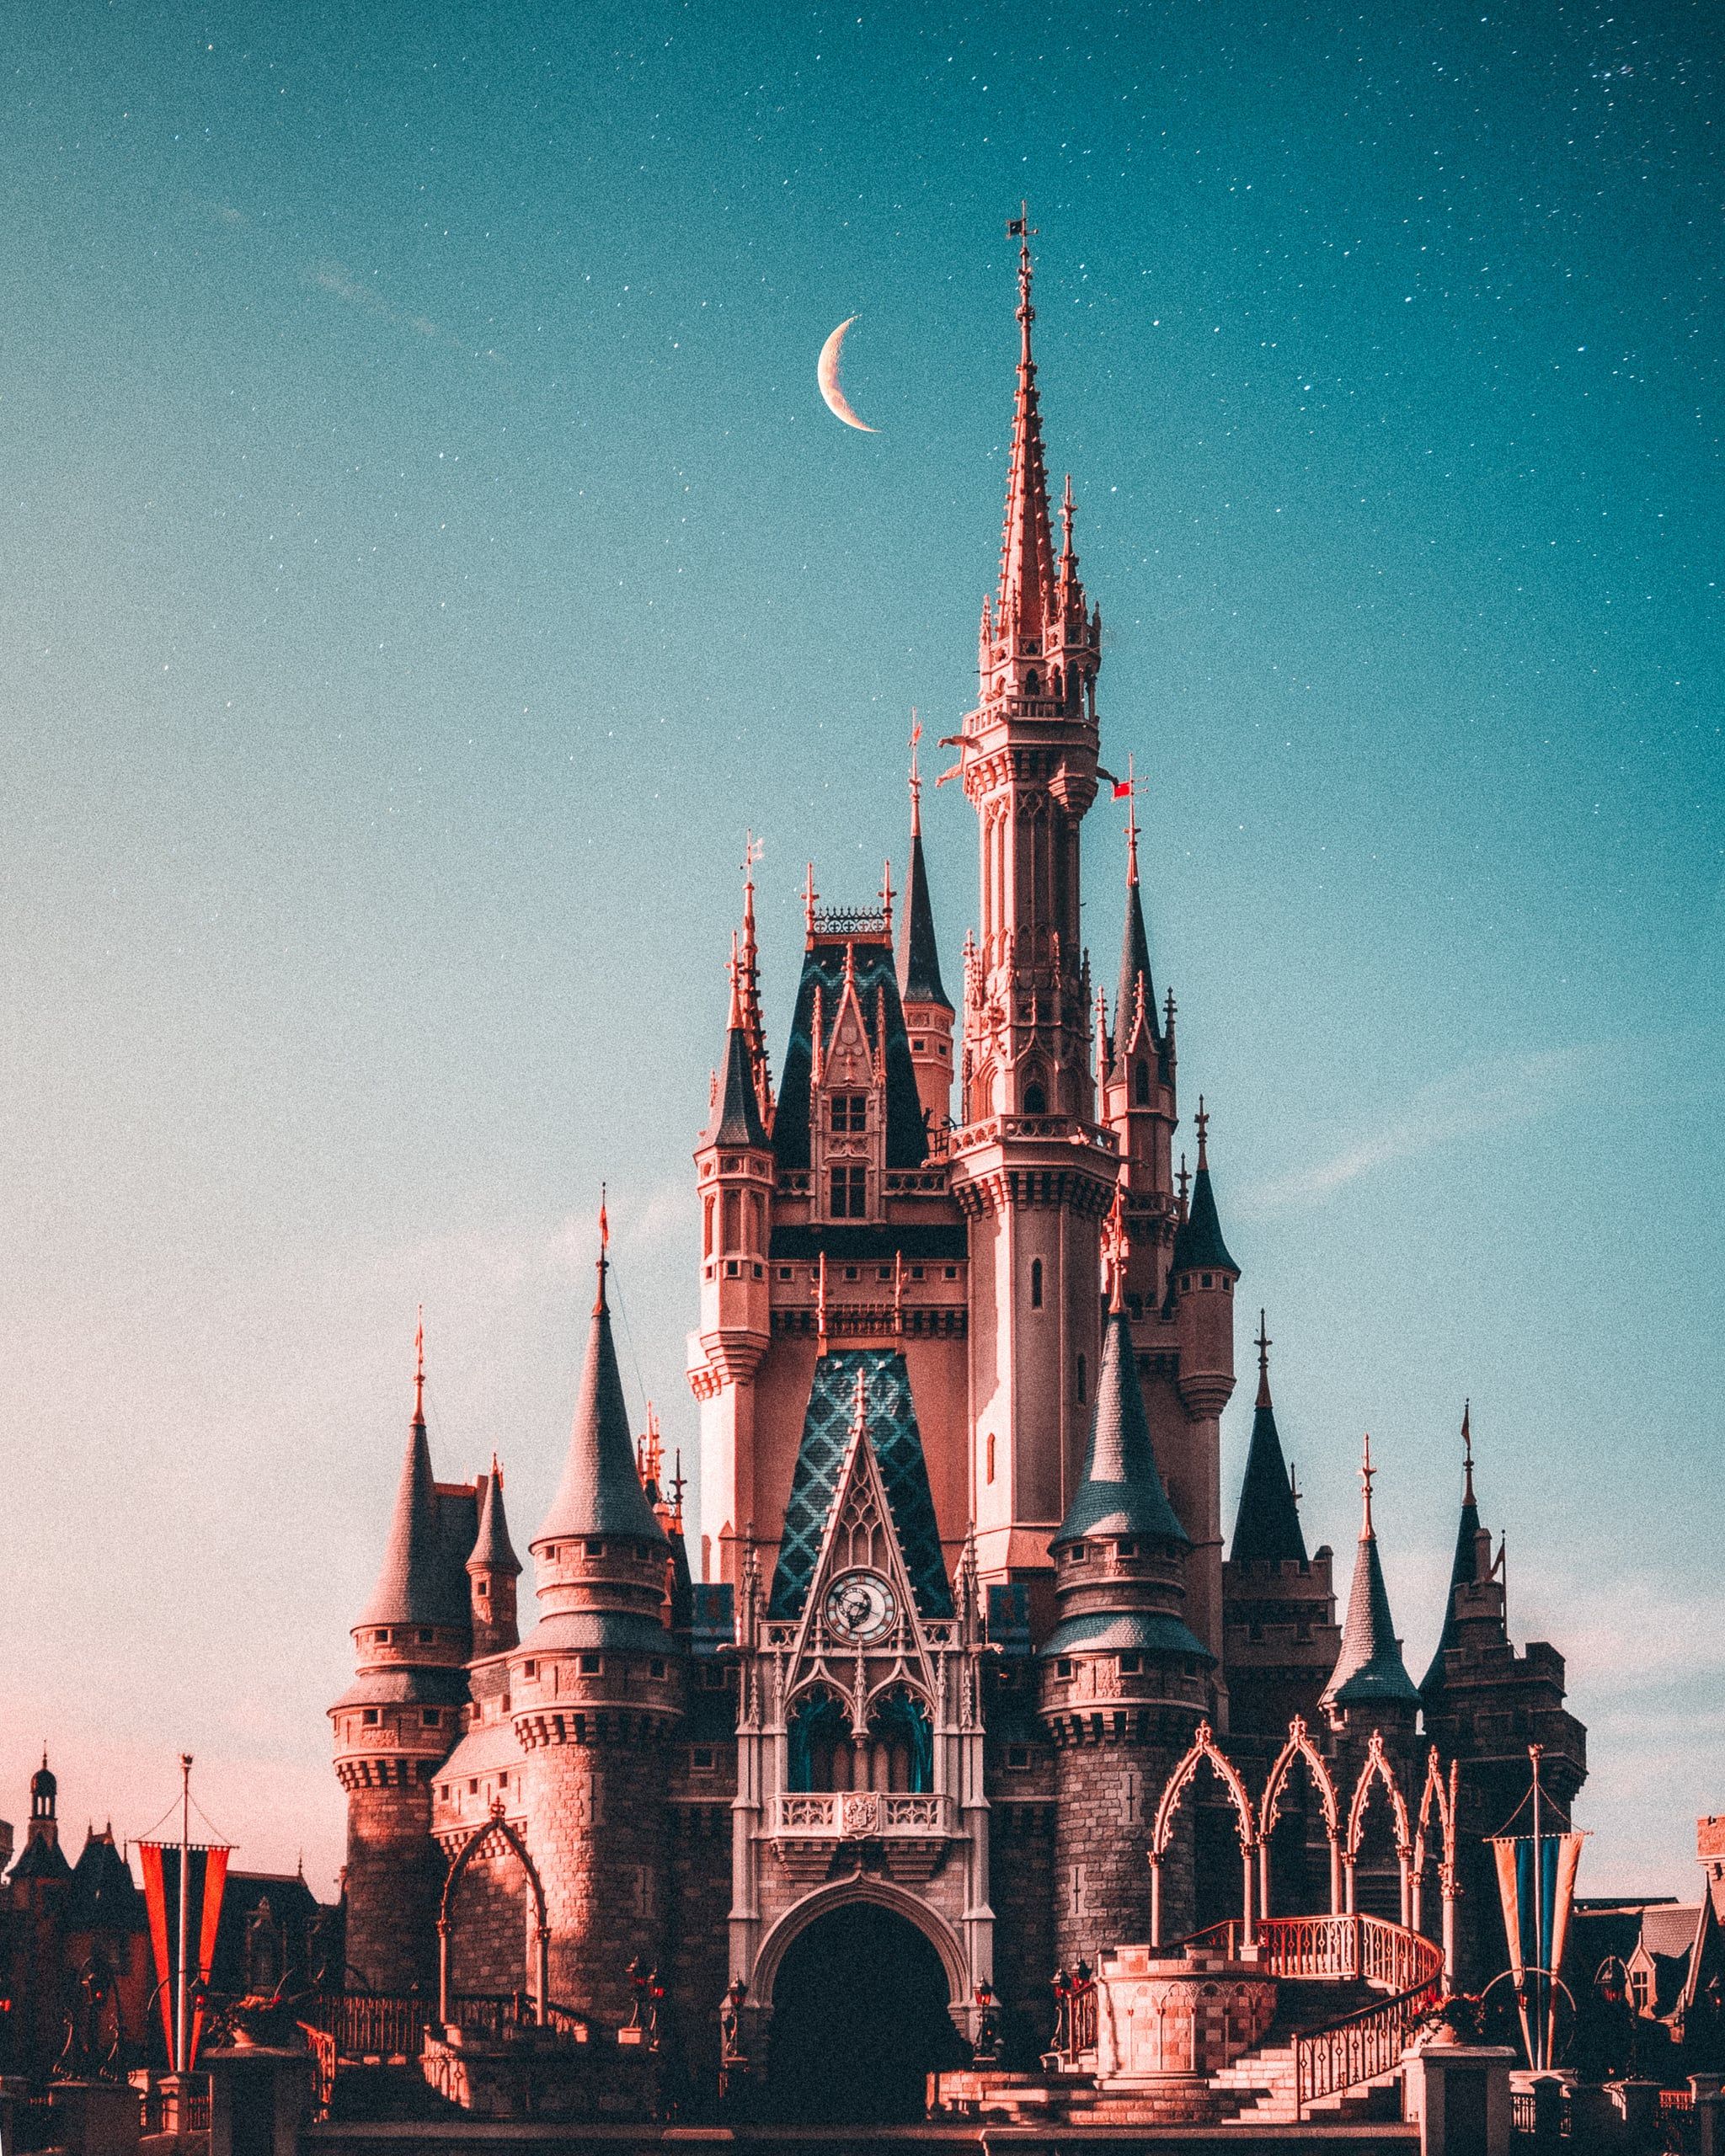 A castle with a crescent moon in the sky. - Disney, Disneyland, castle